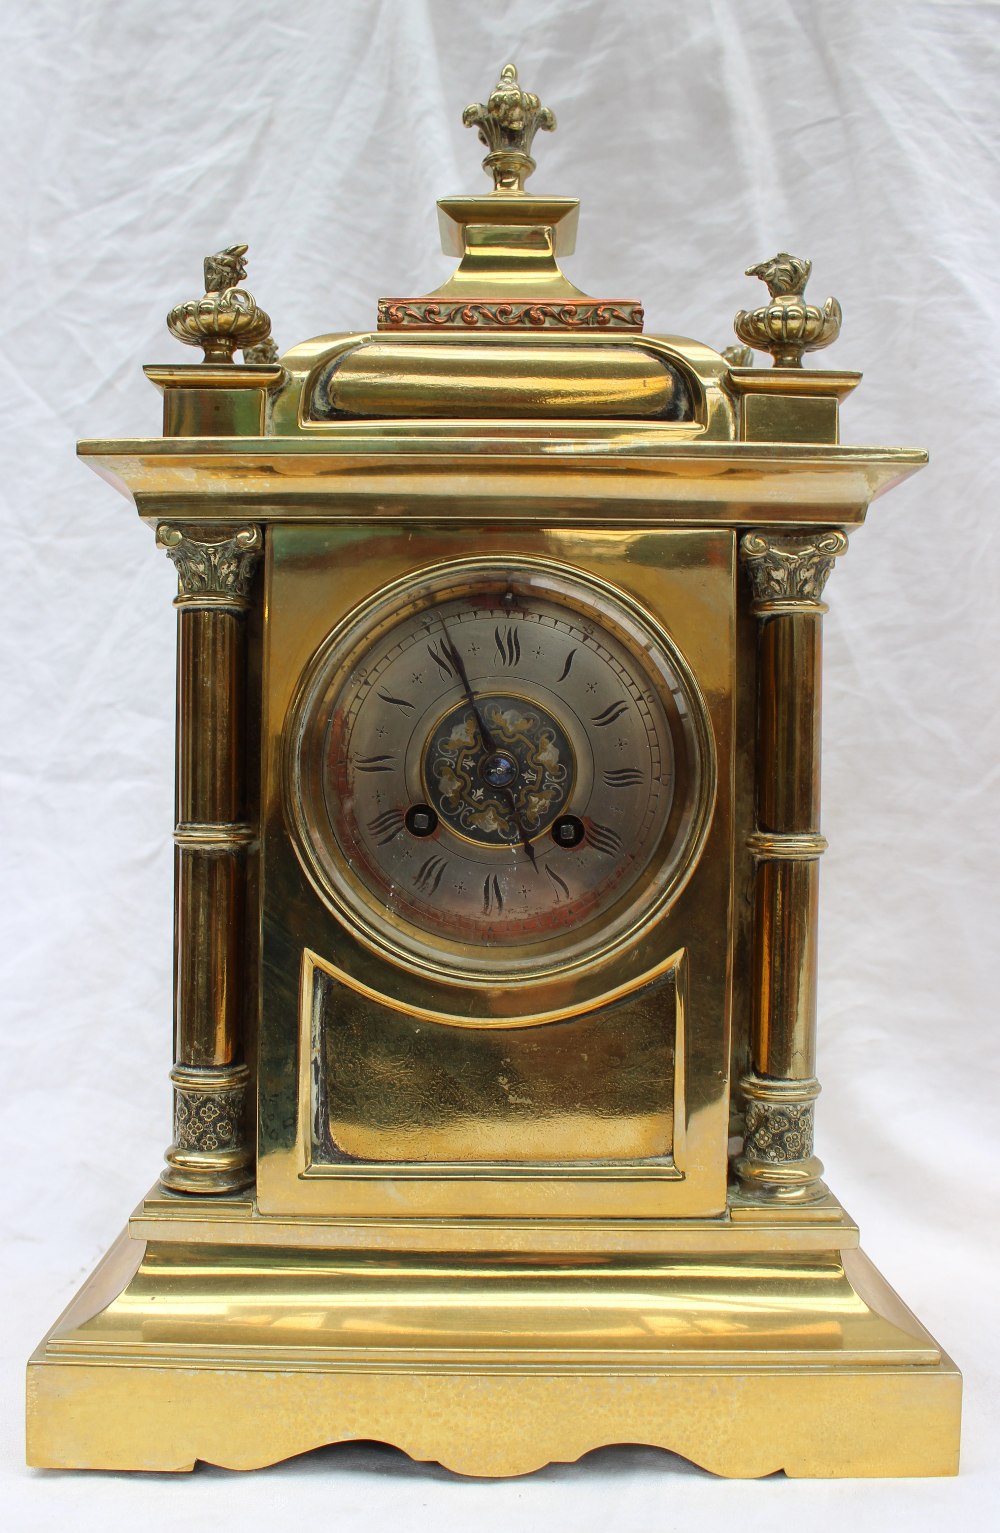 A 19th century brass mantle clock, with a domed top and flame finials, - Image 3 of 8